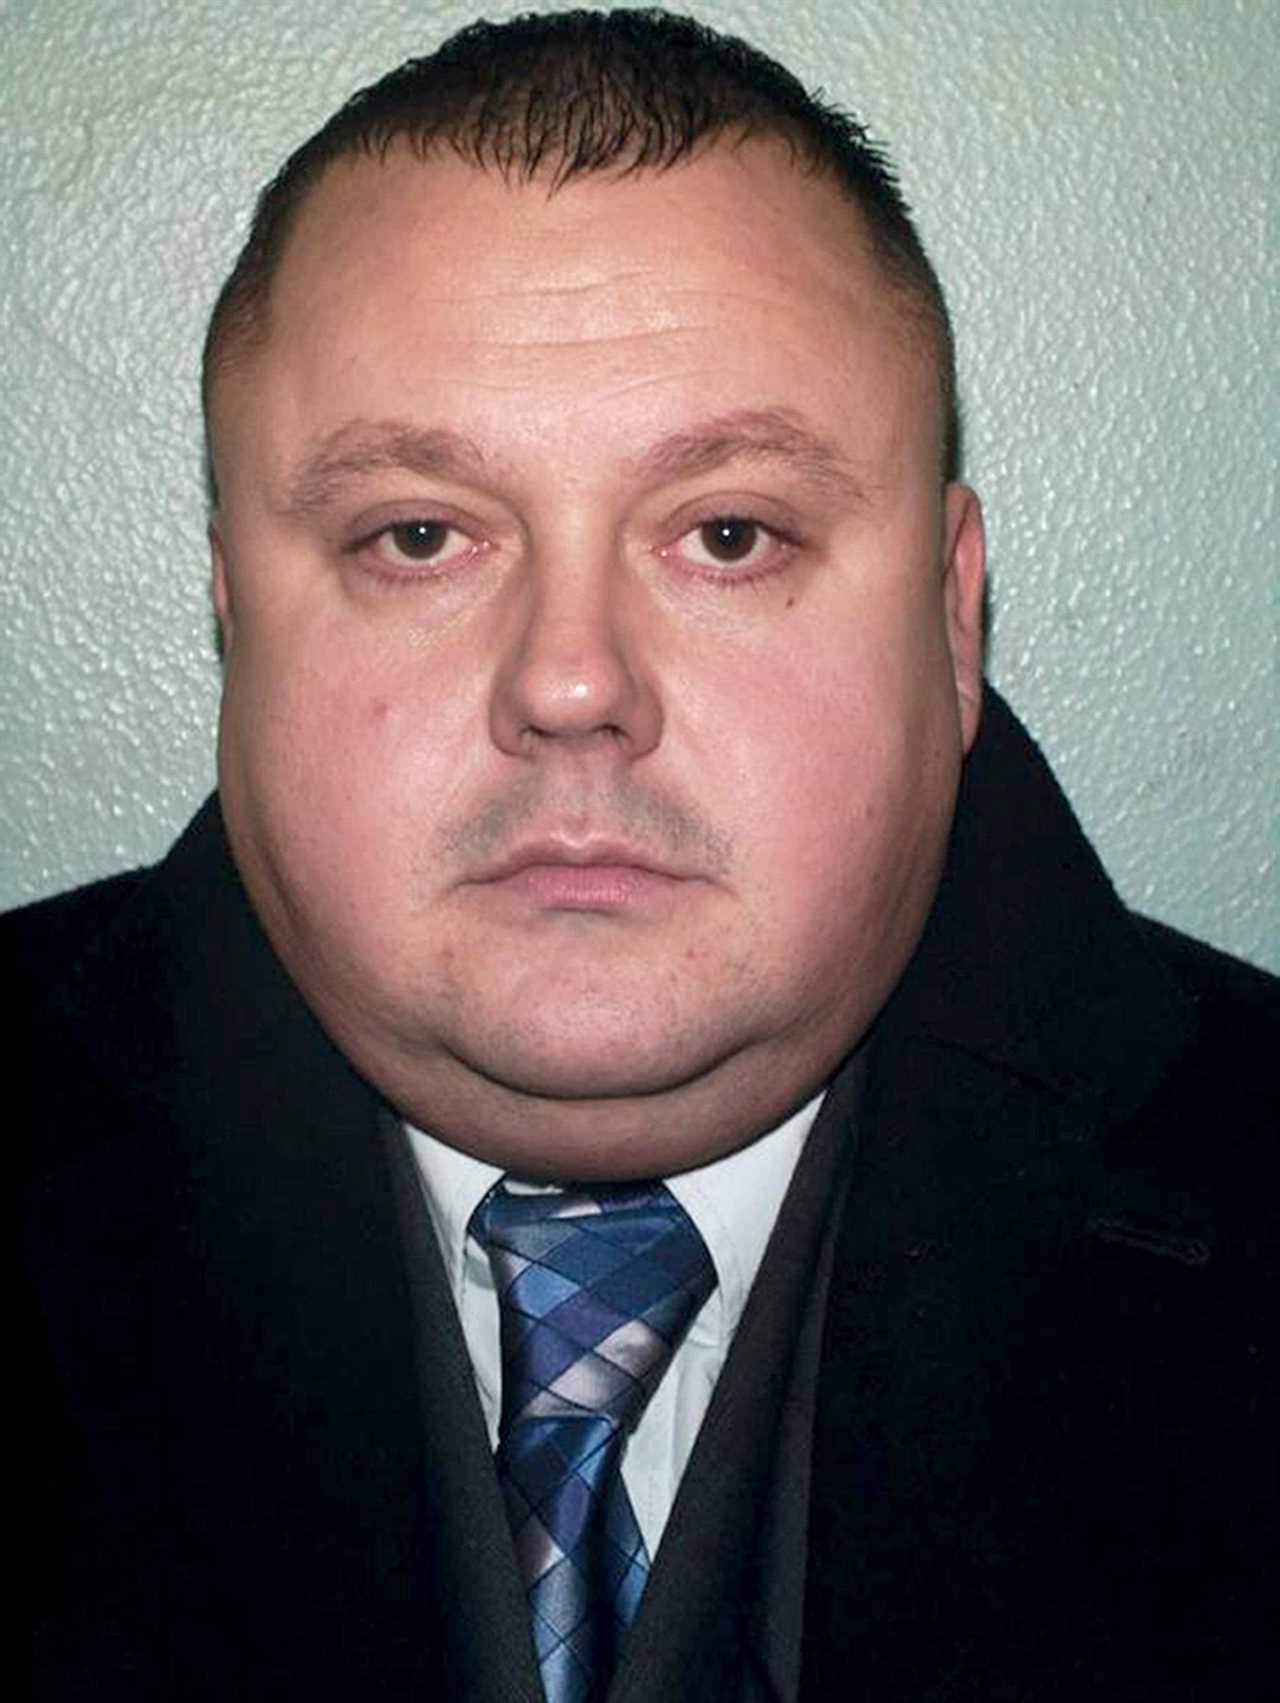 Levi Bellfield has launched legal action against the government after his bid to marry a besotted jail visitor was blocked